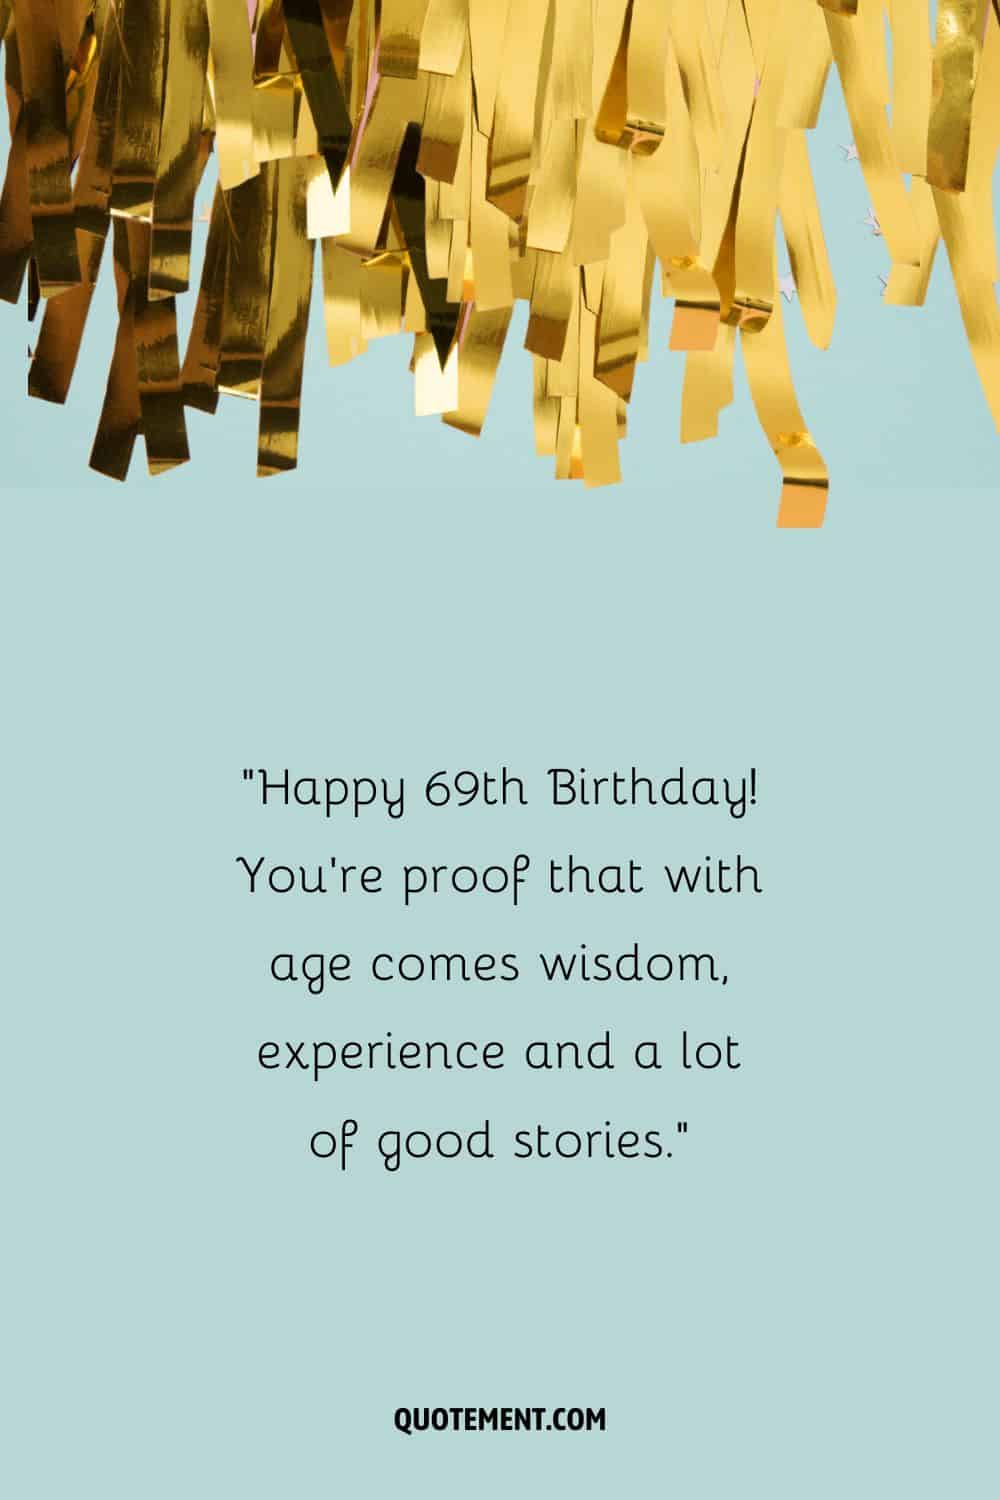 Happy 69th Birthday! You're proof that with age comes wisdom, experience and a lot of good stories.